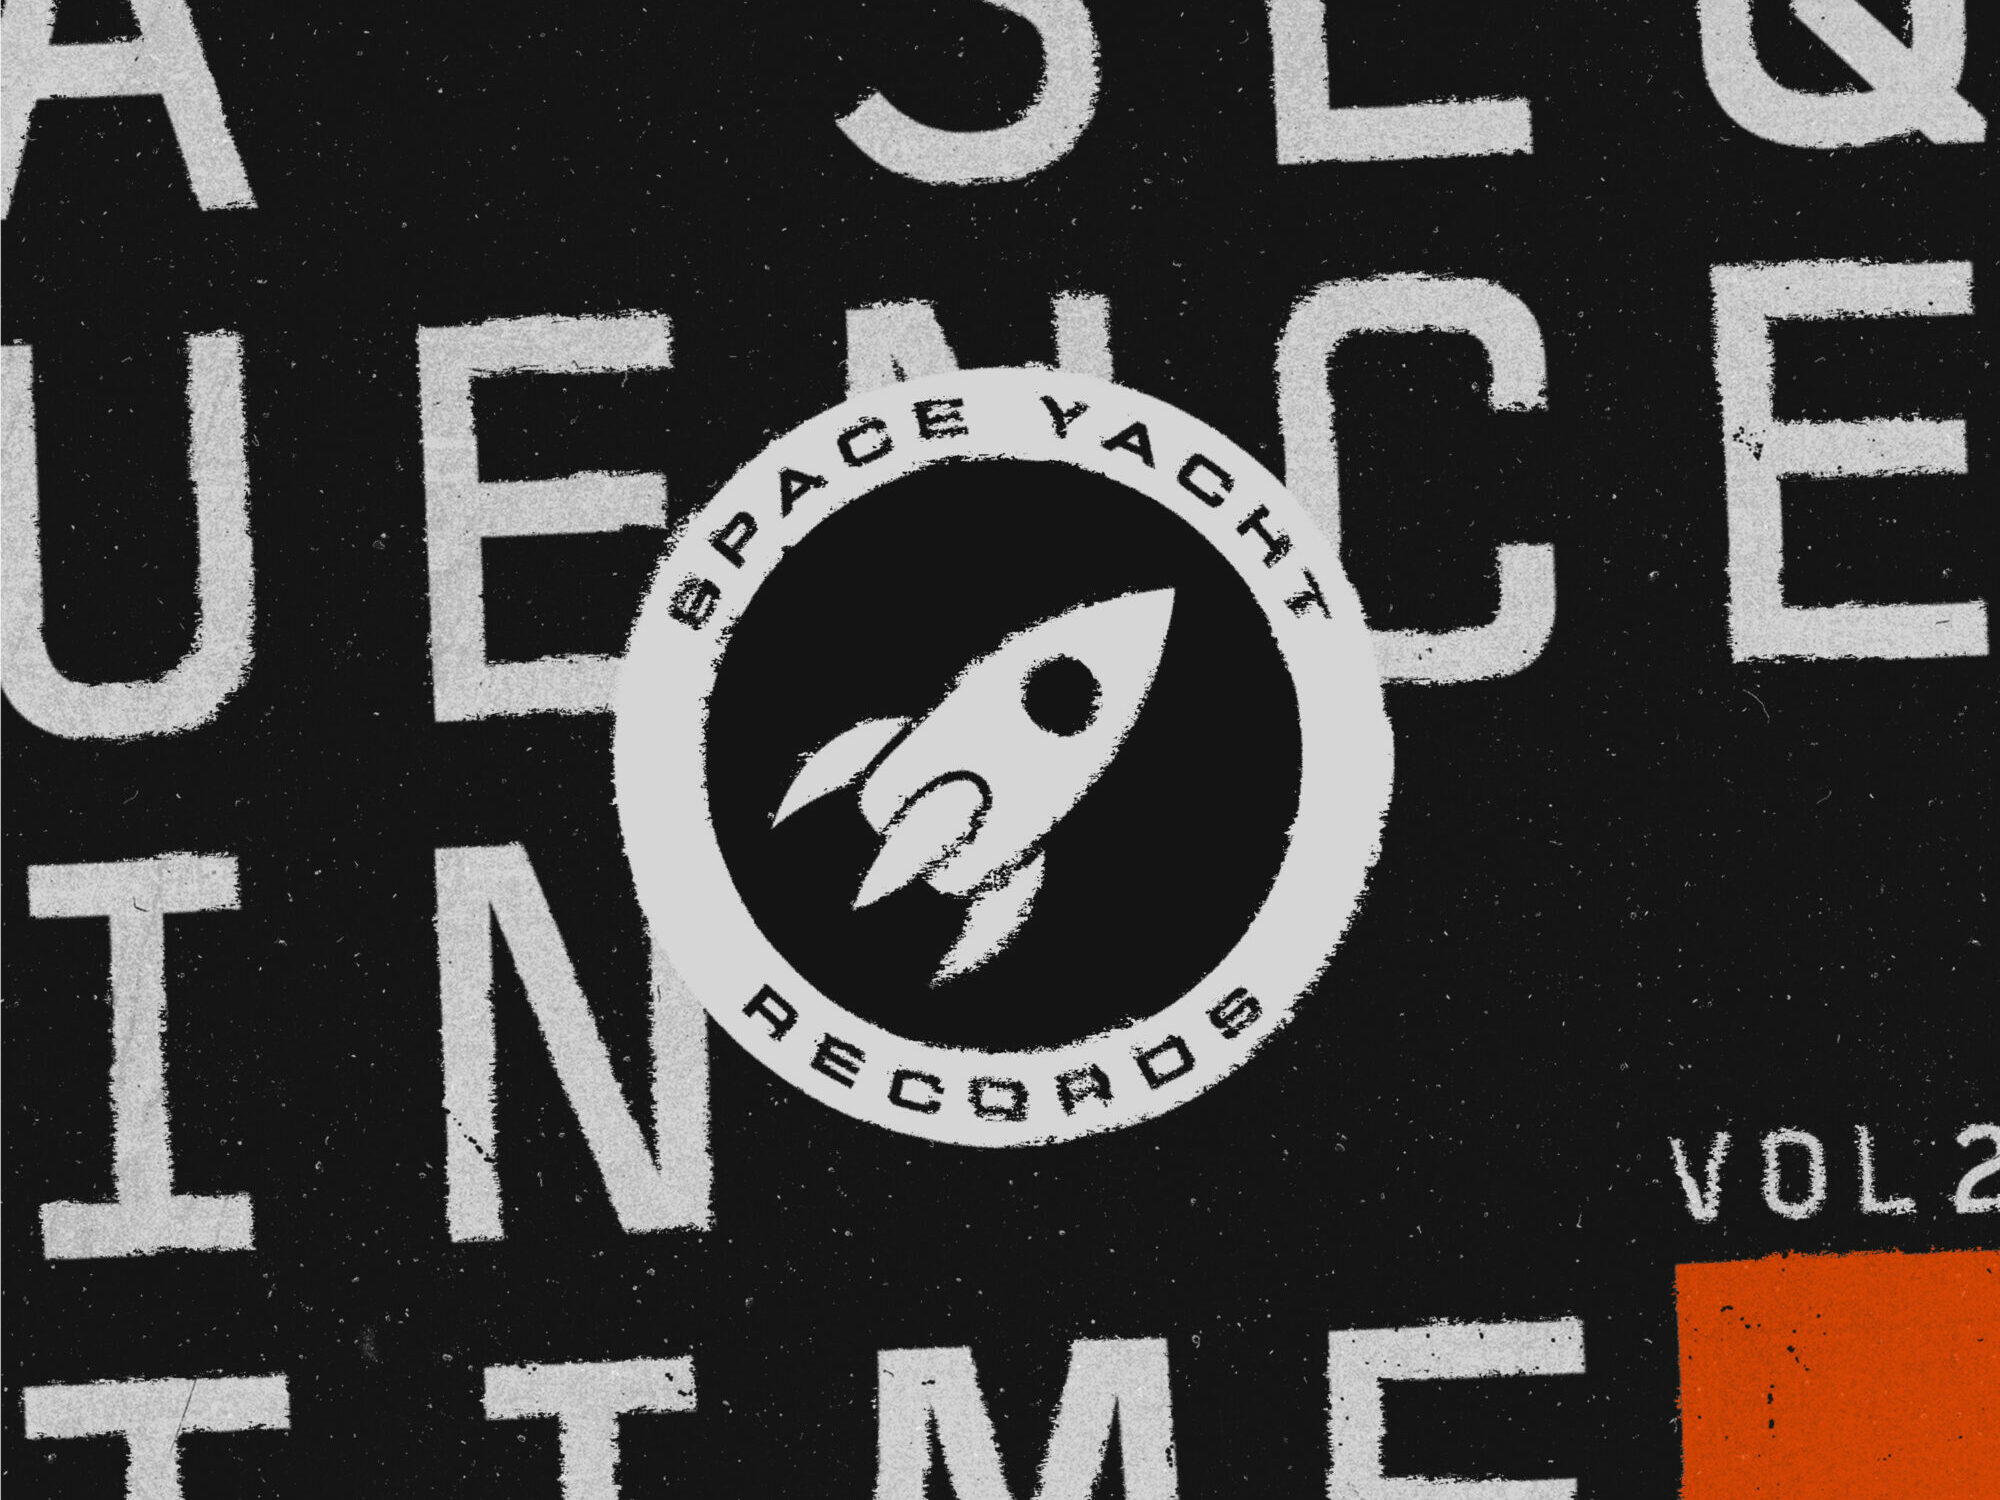 space yacht records